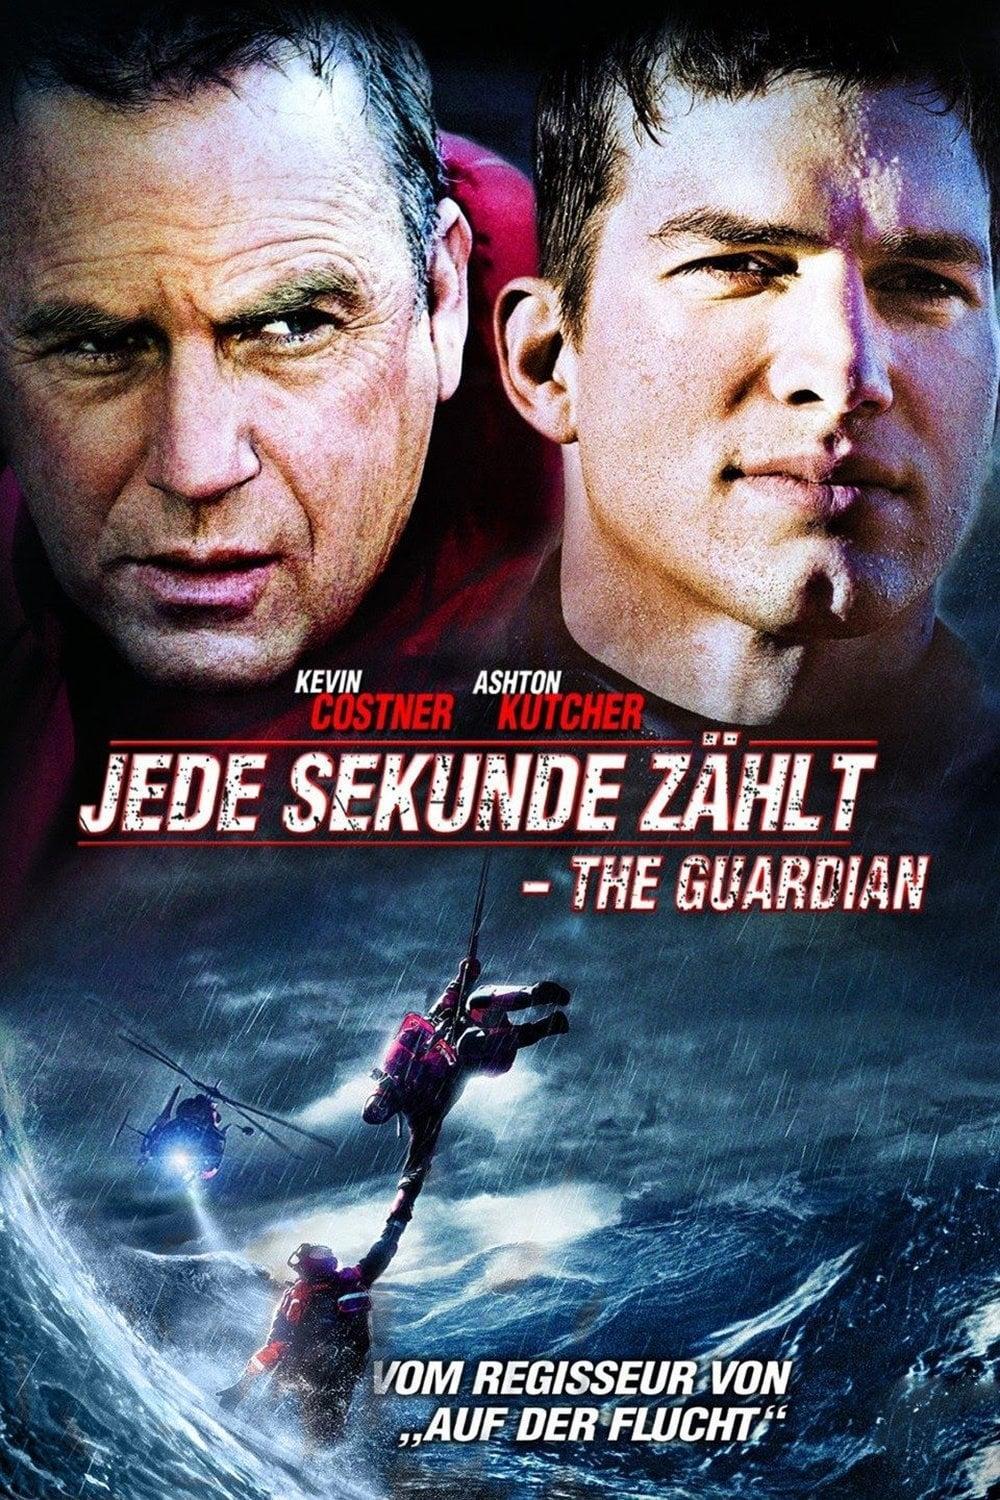 Jede Sekunde zählt - The Guardian poster